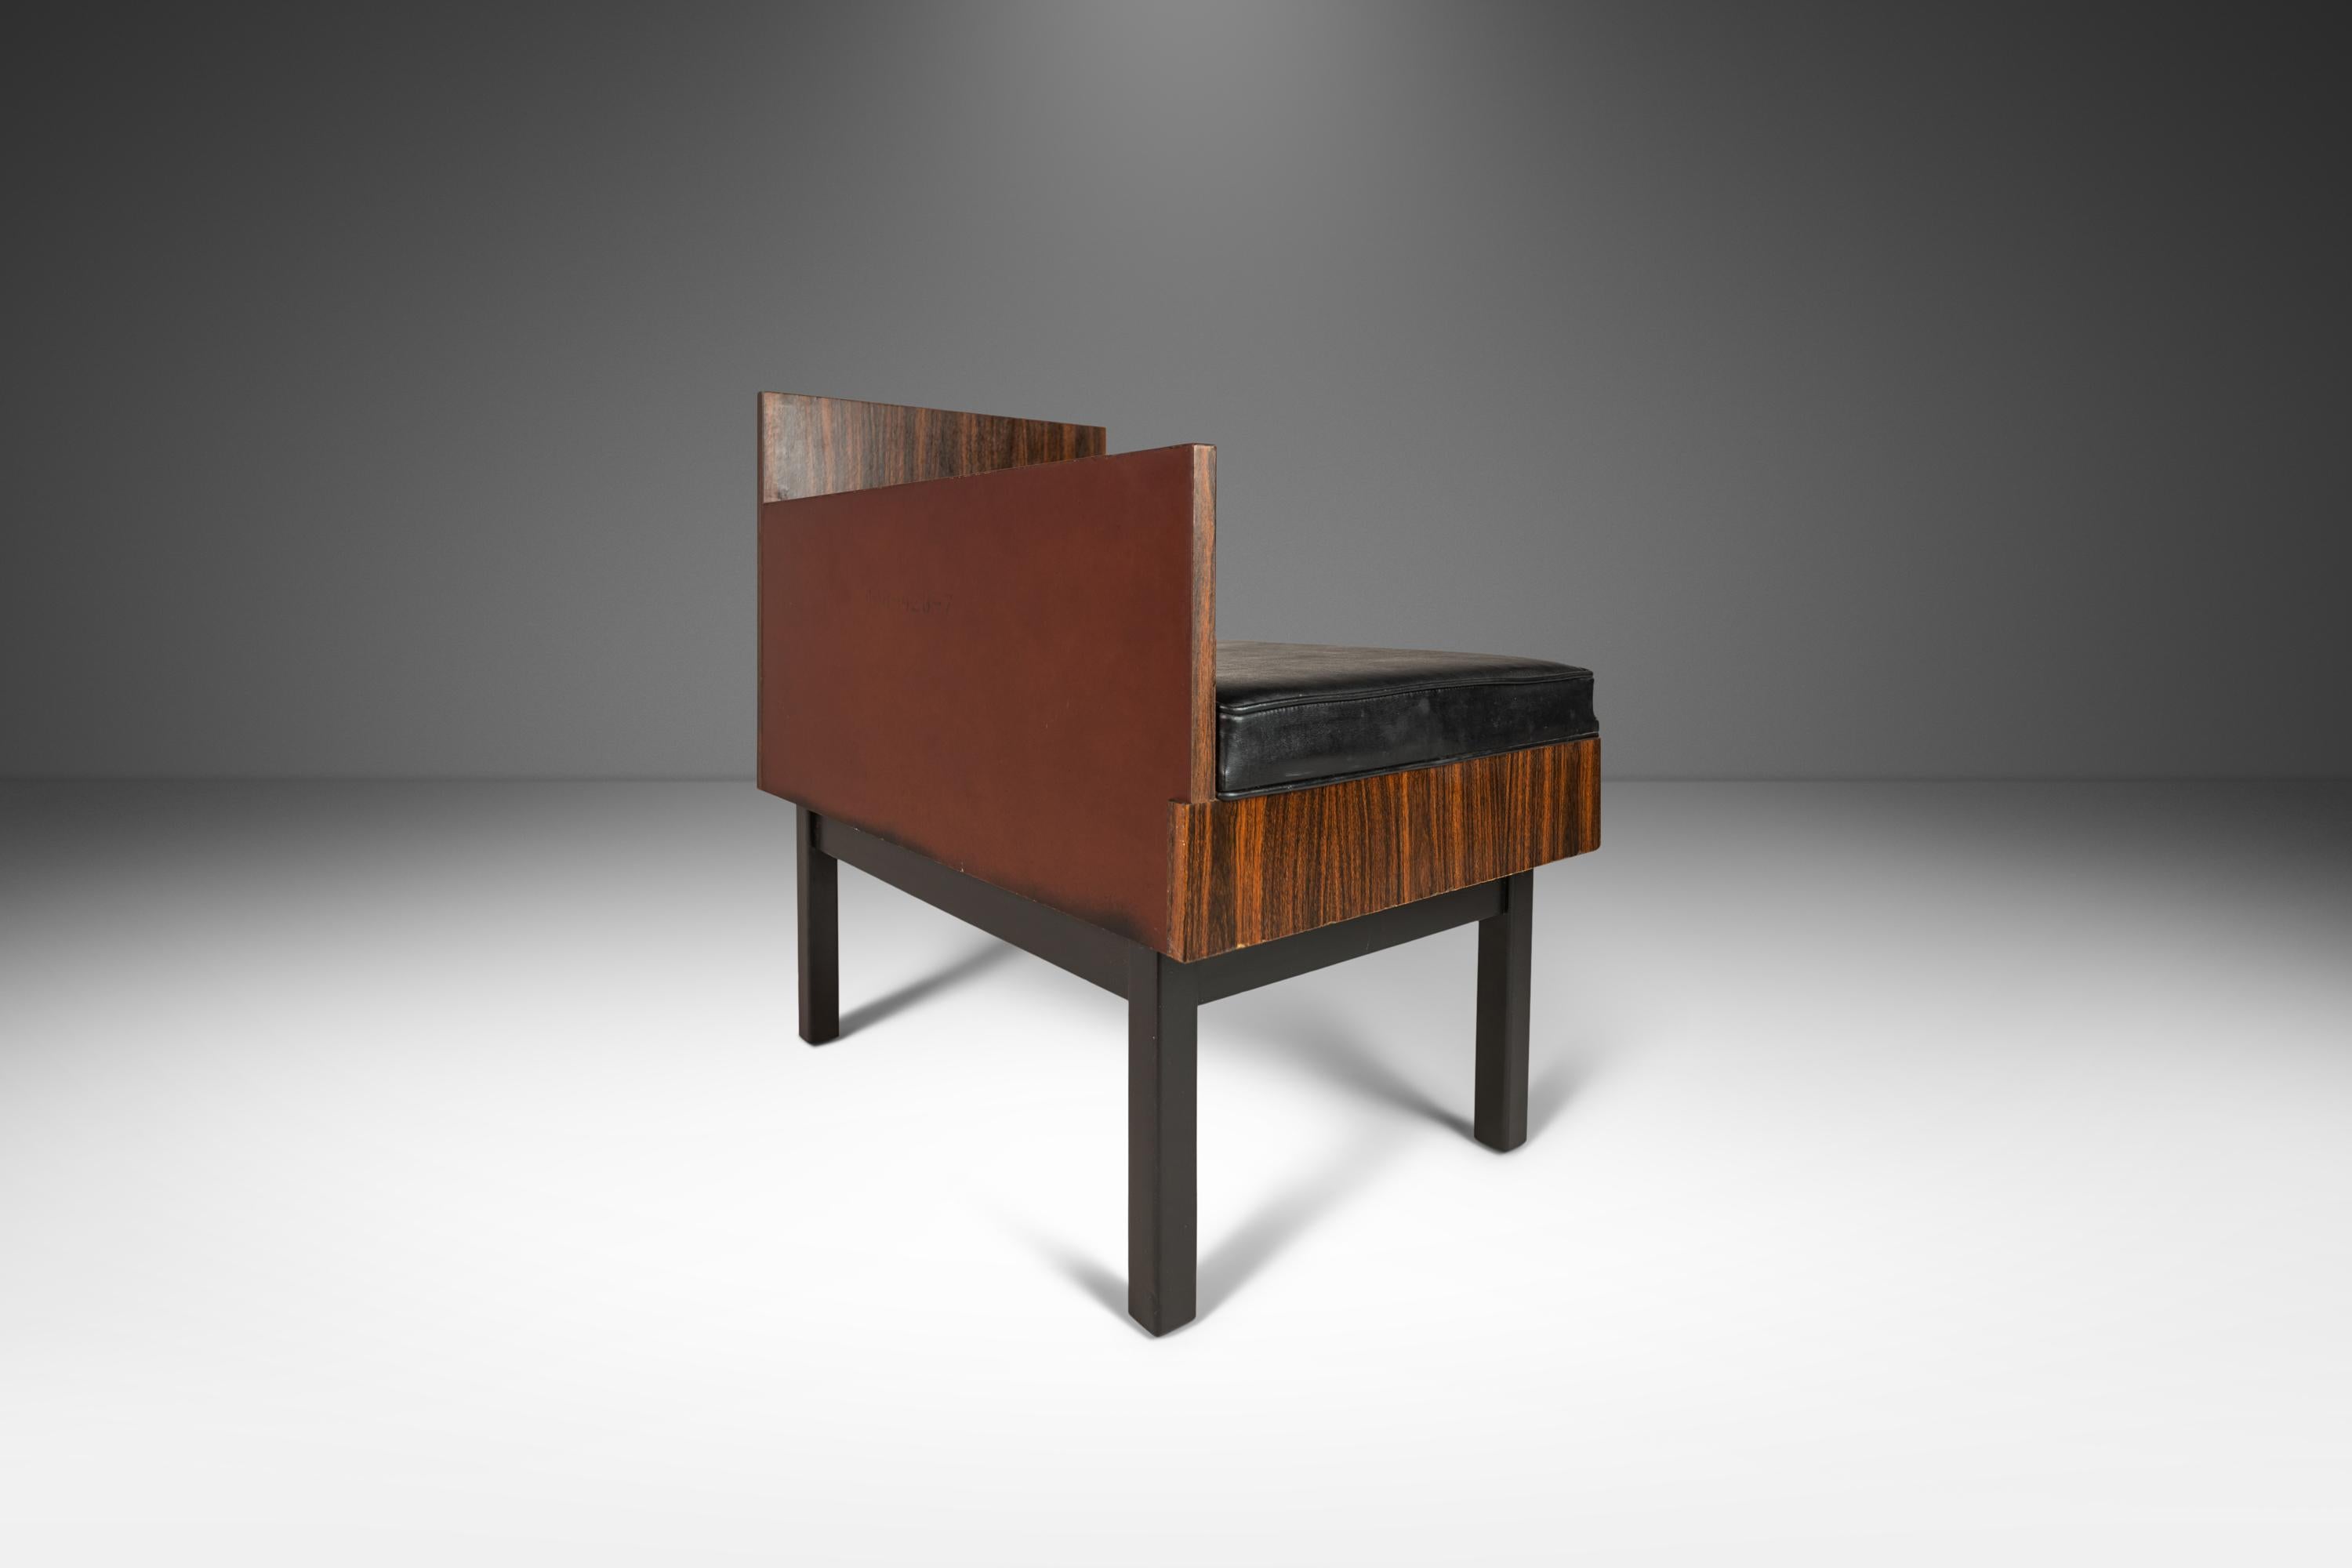 Set of Two ( 2 ) Modular Benches Kissing Benches in Rosewood Laminate, c. 1950's For Sale 6